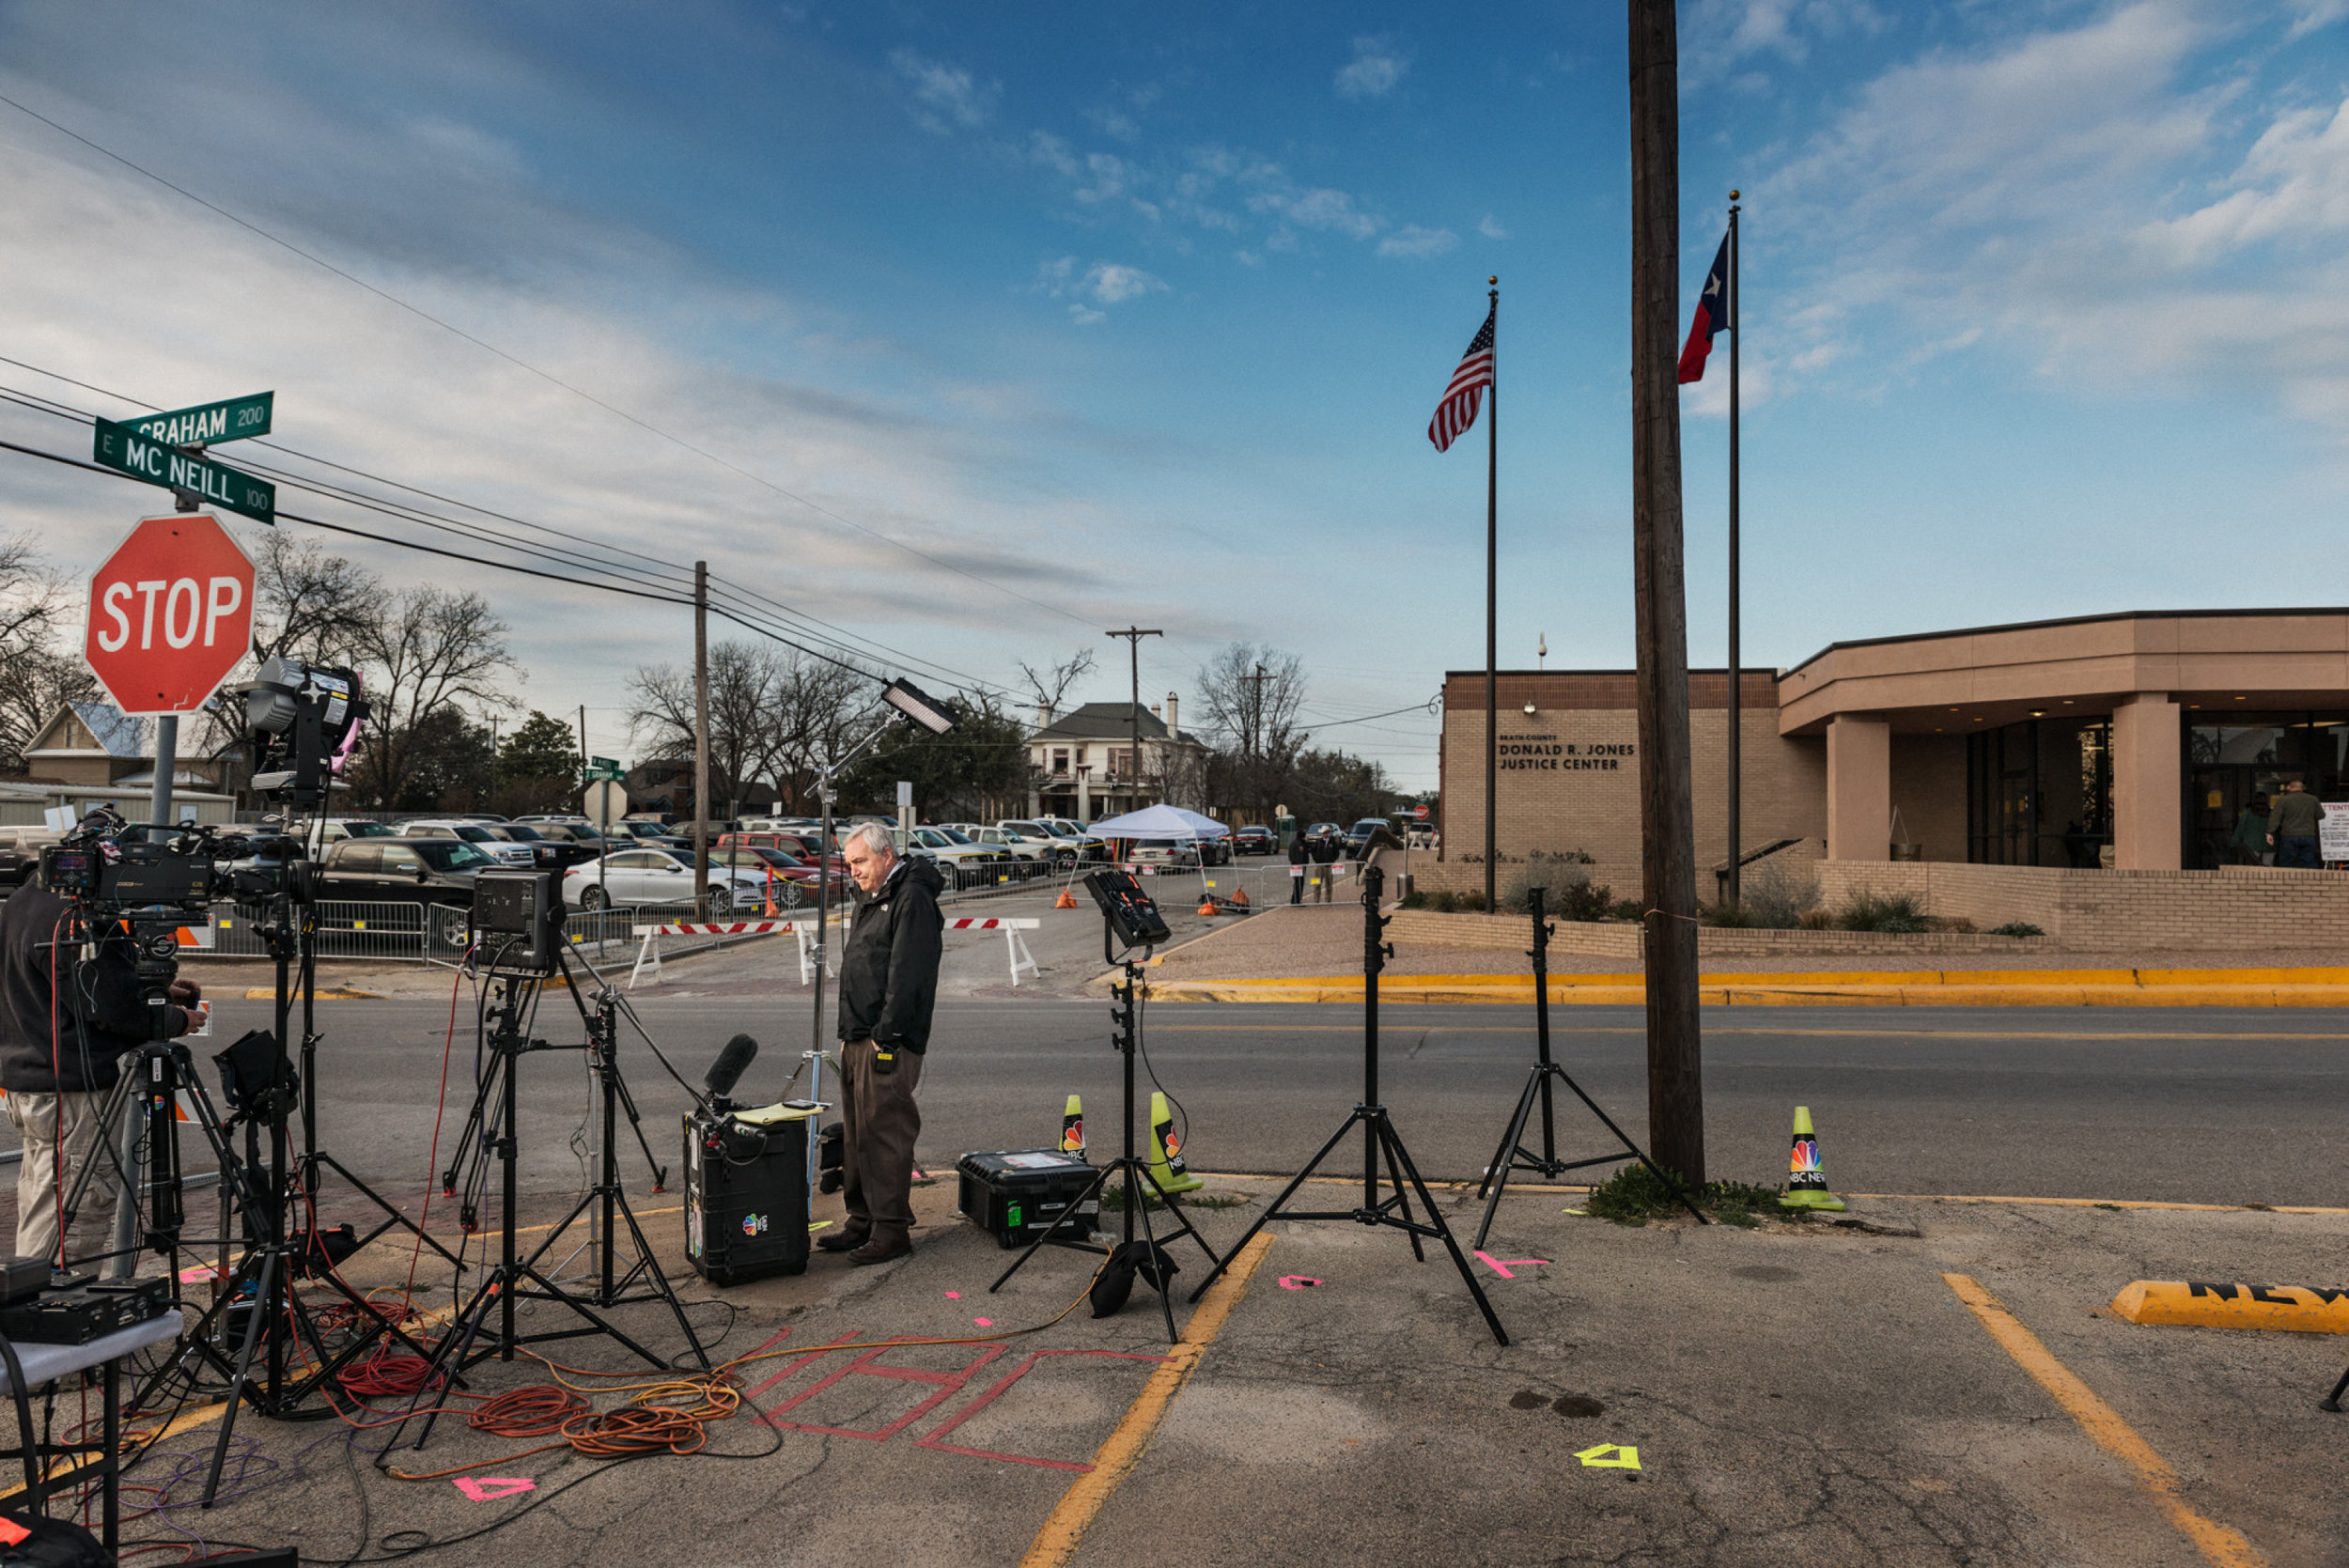   I was sent to cover the media frenzy of the “American Sniper Trial,” in the small cowboy town of Stephenville Texas, located 90 miles West of Dallas. Because of the best selling book and movie, the trial has brought a flood of media to this small t